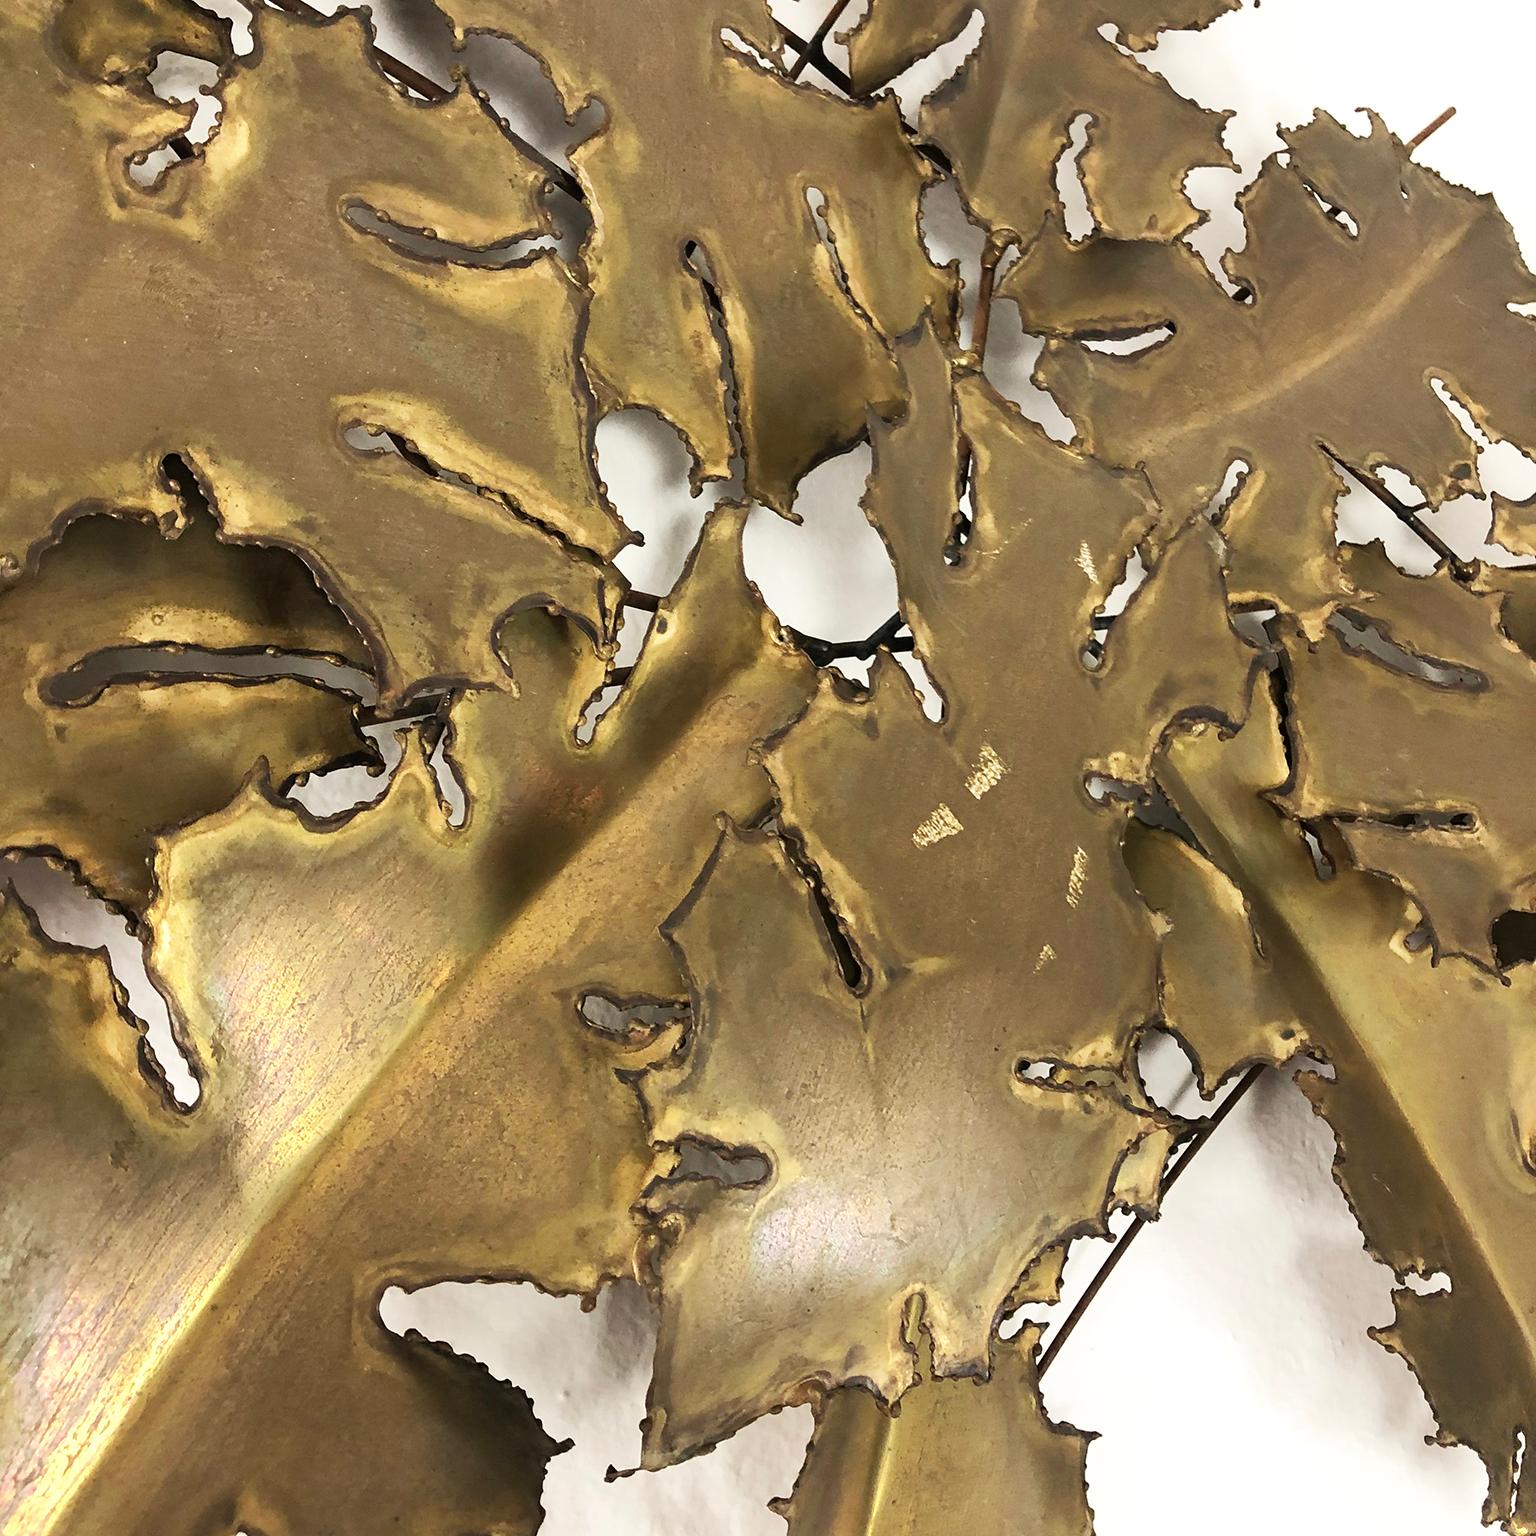 Circa 1960. We offer this Brutalist brass wall sculpture in leaves form, signed by EBANO.